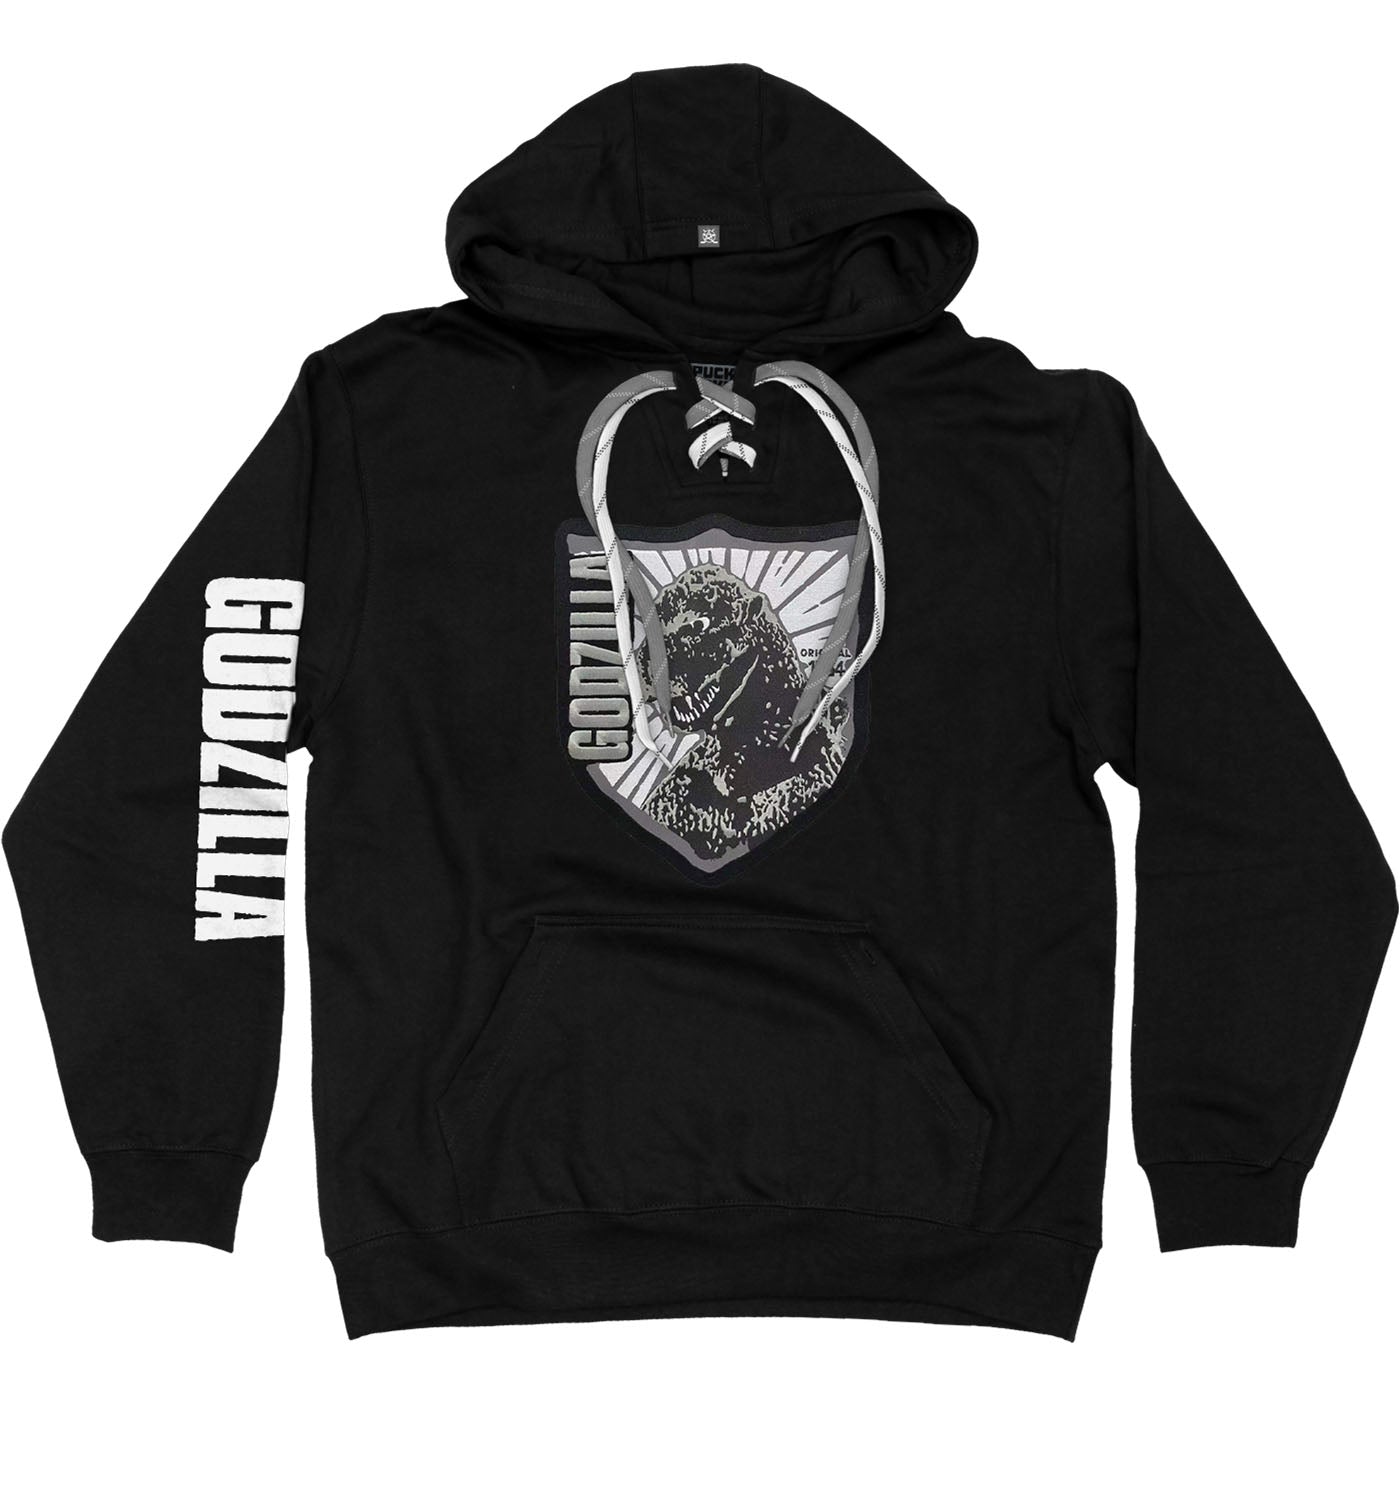 GODZILLA ‘AWAKENED’ laced pullover hockey hoodie in black with grey and white striped hockey laces front view